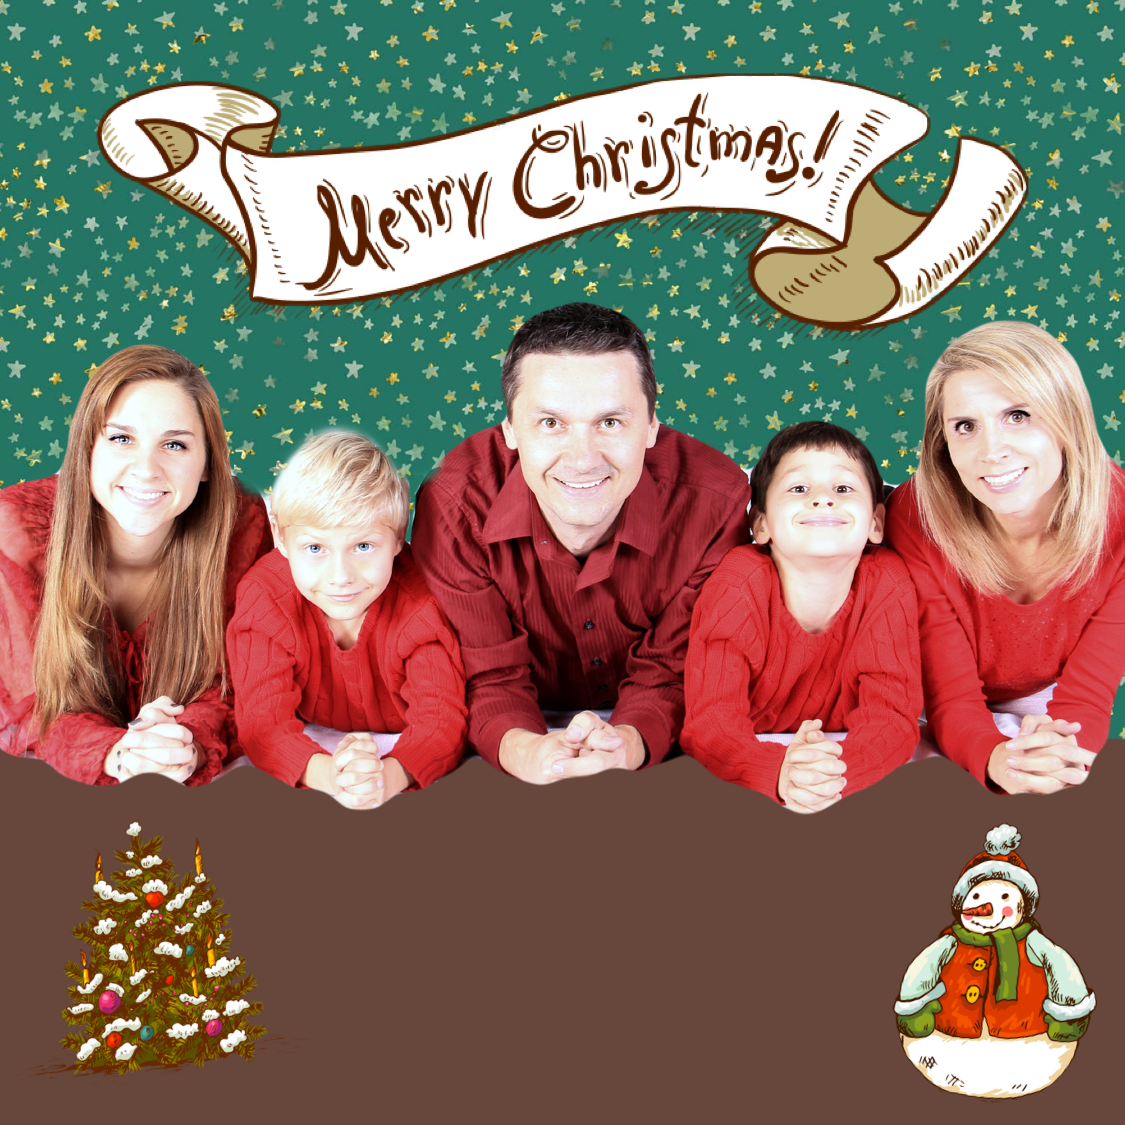 A Family Is Posing For A Christmas Card Template